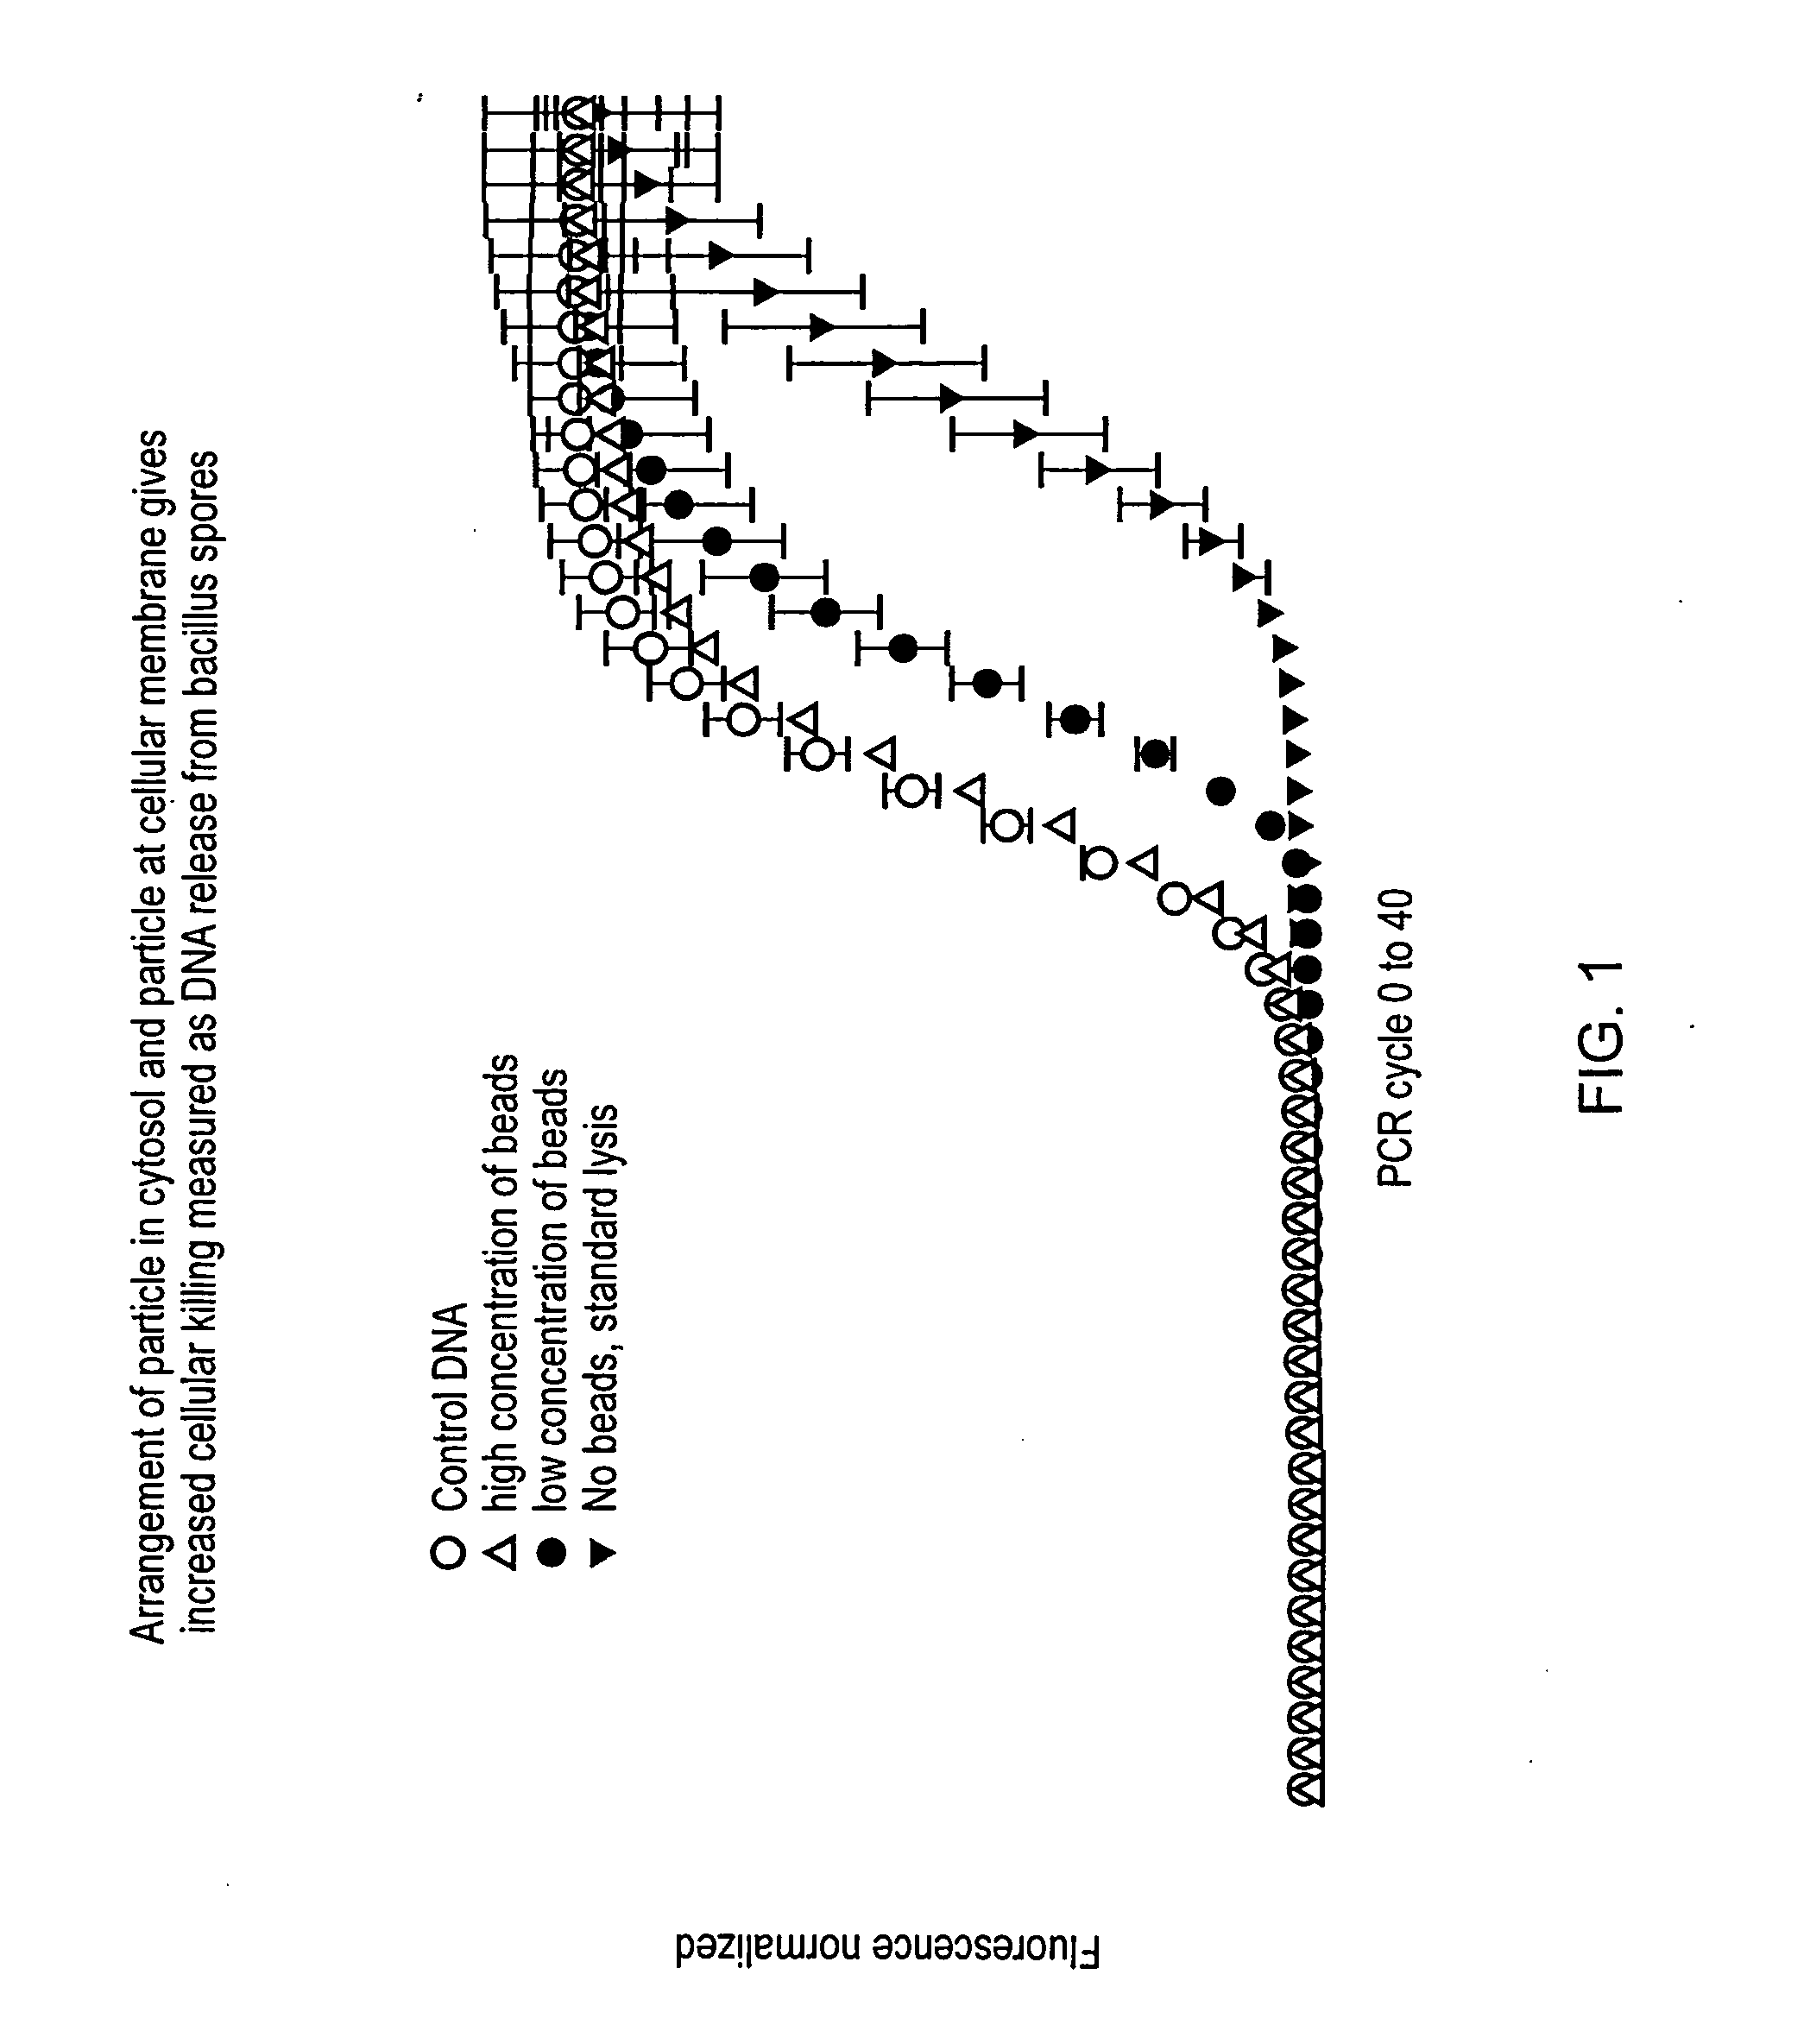 Method, apparatus and system for electroporation